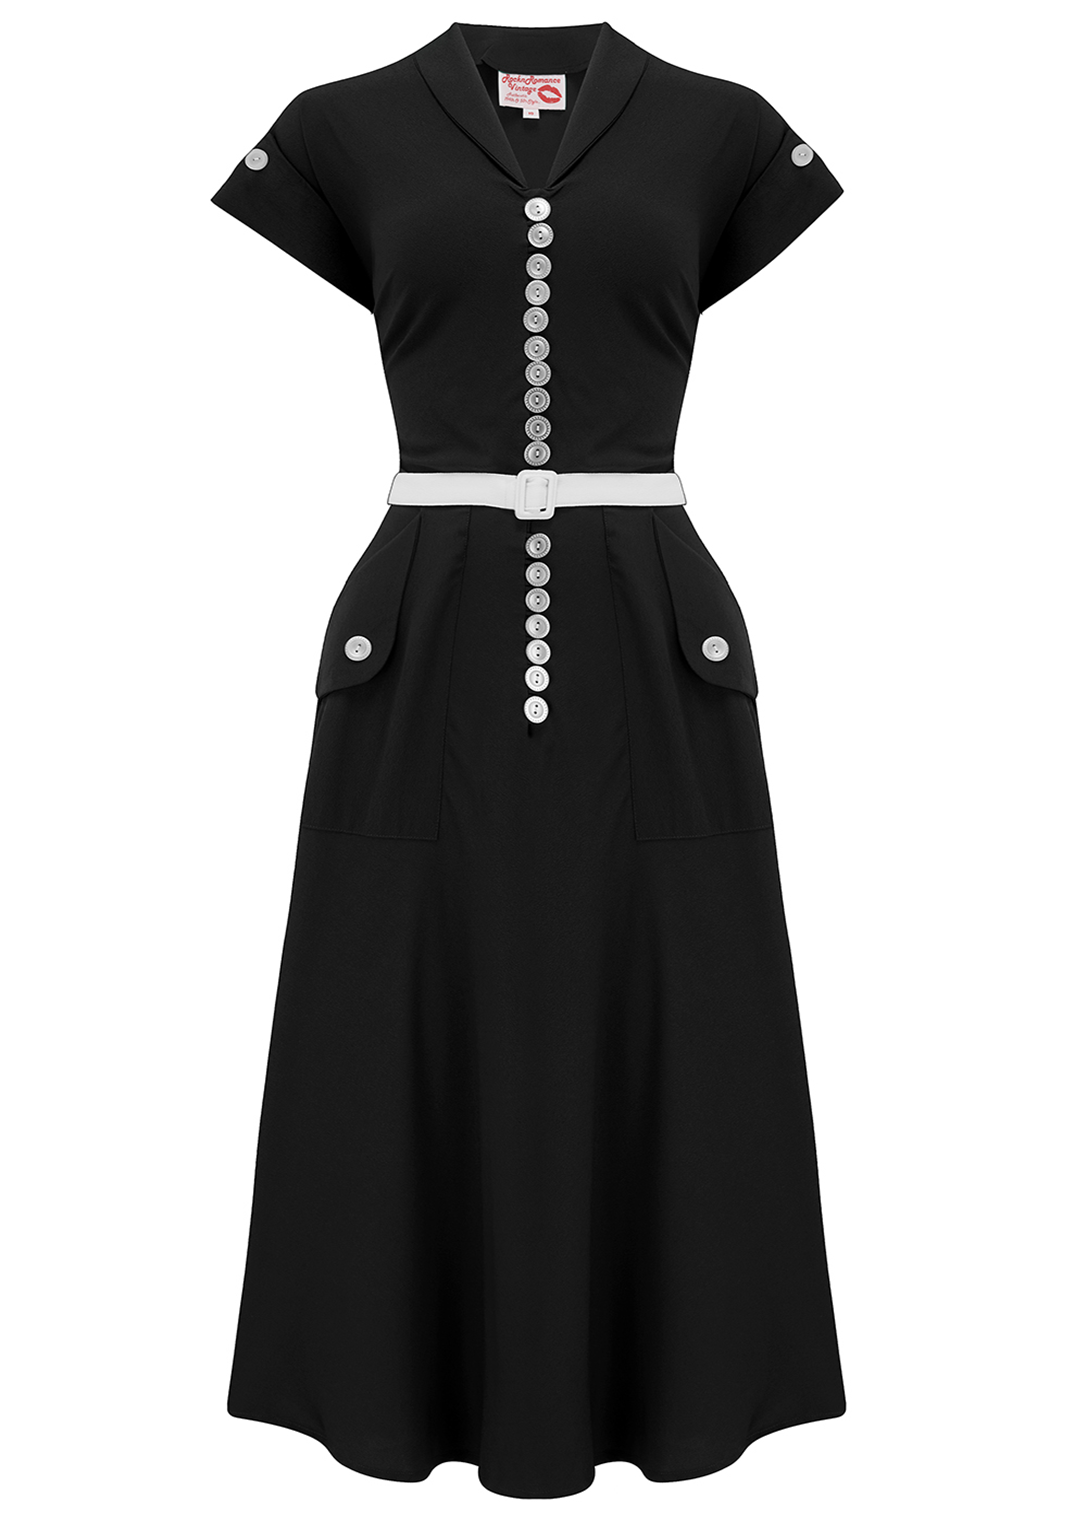 The "Casey" Dress in Solid Black, True & Authentic 1950s Vintage Style - True and authentic vintage style clothing, inspired by the Classic styles of CC41 , WW2 and the fun 1950s RocknRoll era, for everyday wear plus events like Goodwood Revival, Twinwood Festival and Viva Las Vegas Rockabilly Weekend Rock n Romance Rock n Romance